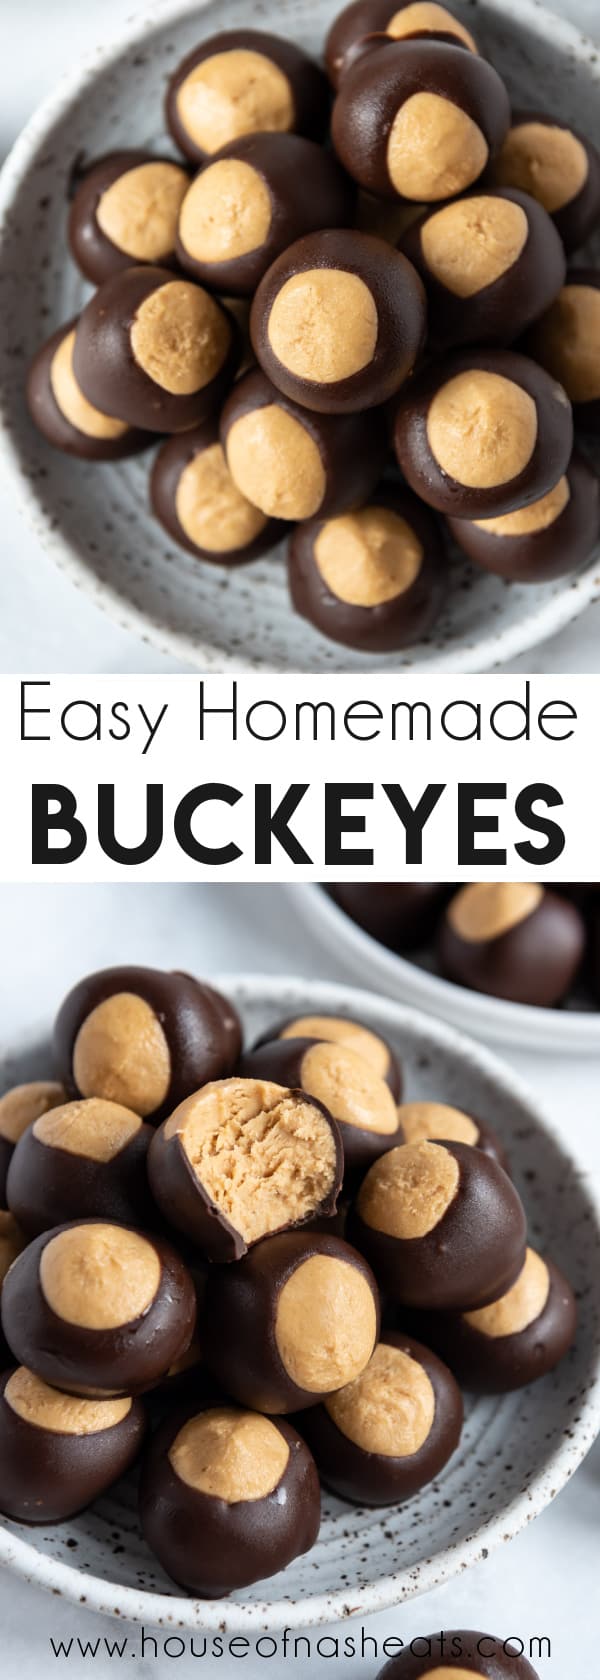 A collage of images of buckeyes candy piled on plates with text overlay.